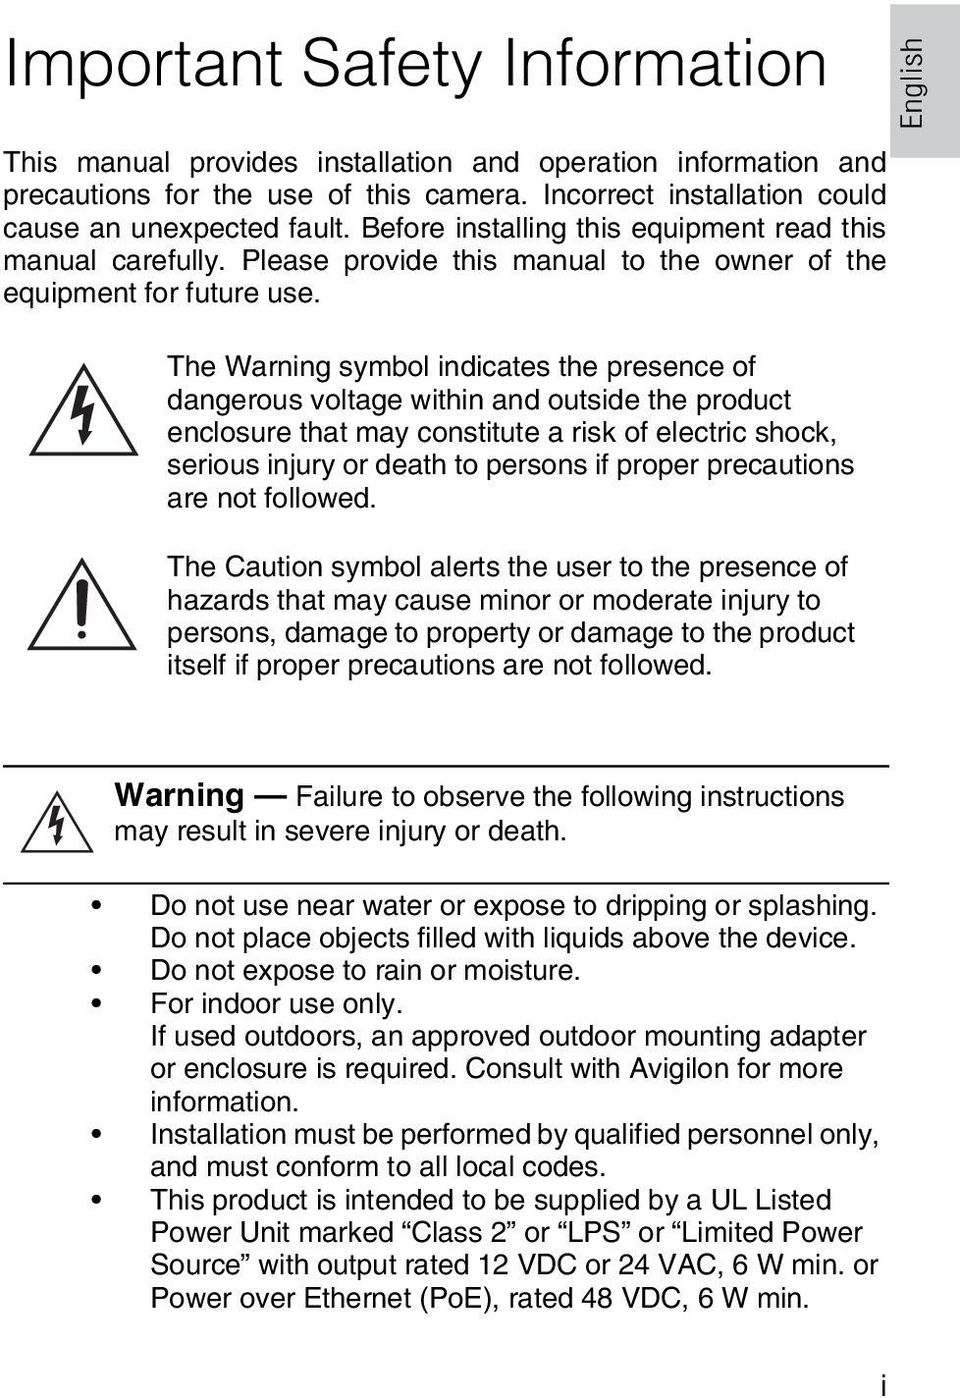 The Warning symbol indicates the presence of dangerous voltage within and outside the product enclosure that may constitute a risk of electric shock, serious injury or death to persons if proper